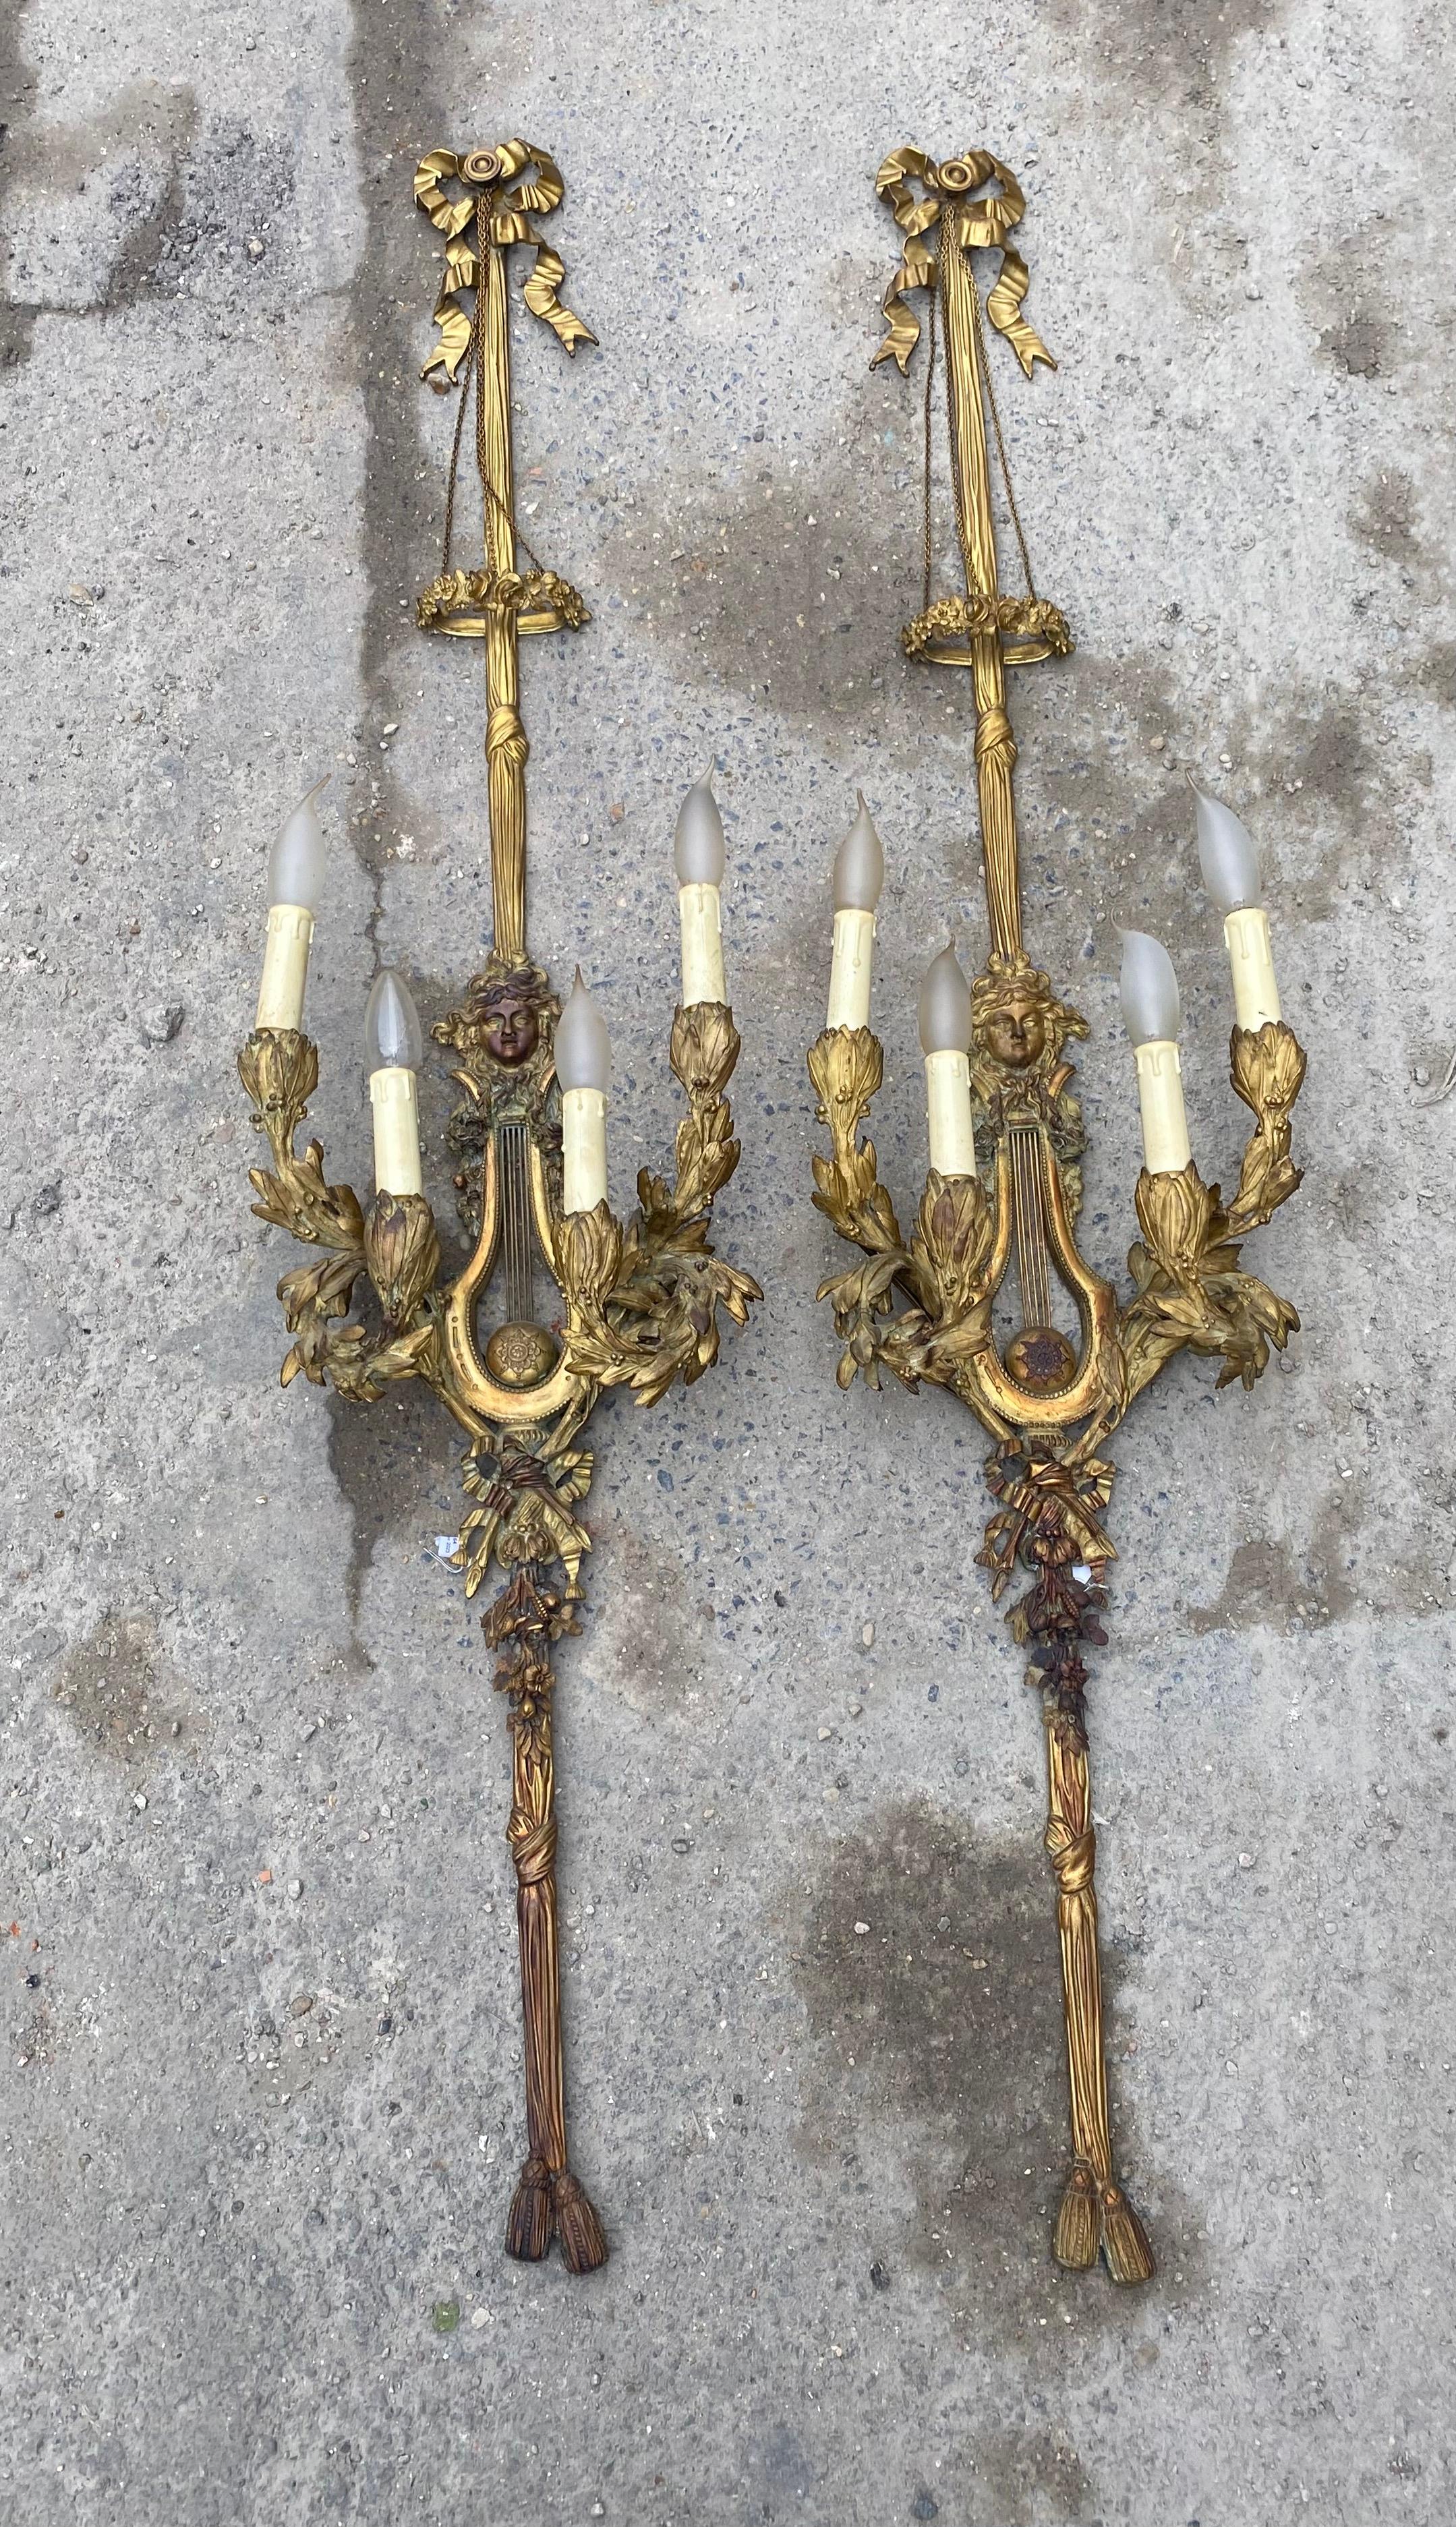 Pair of Louis 16 and 4 arms gilt bronze sconces
Condition of use and oxydations
E14 flame bulbs
Measures: 144 X 32 X 20.5 cm
Pierre Gouthière (1732-1813) son of a saddle maker, rose to become the most famous Parisian bronze chaser and gilder of